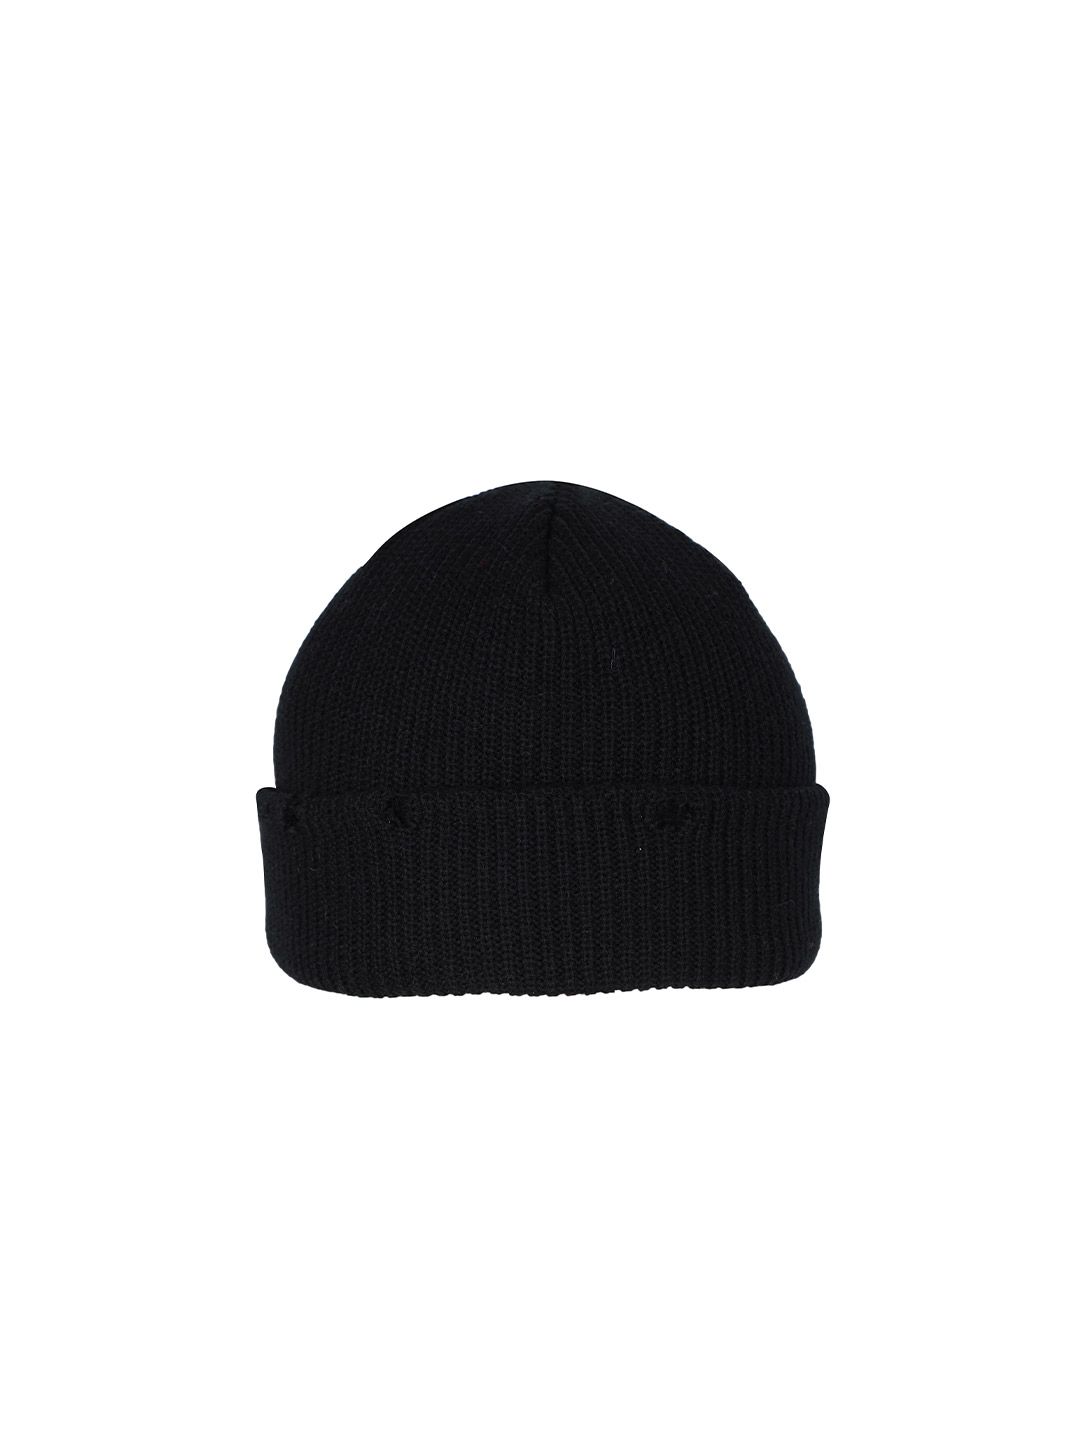 FabSeasons Unisex Black Stretchable Acrylic Beanie Price in India